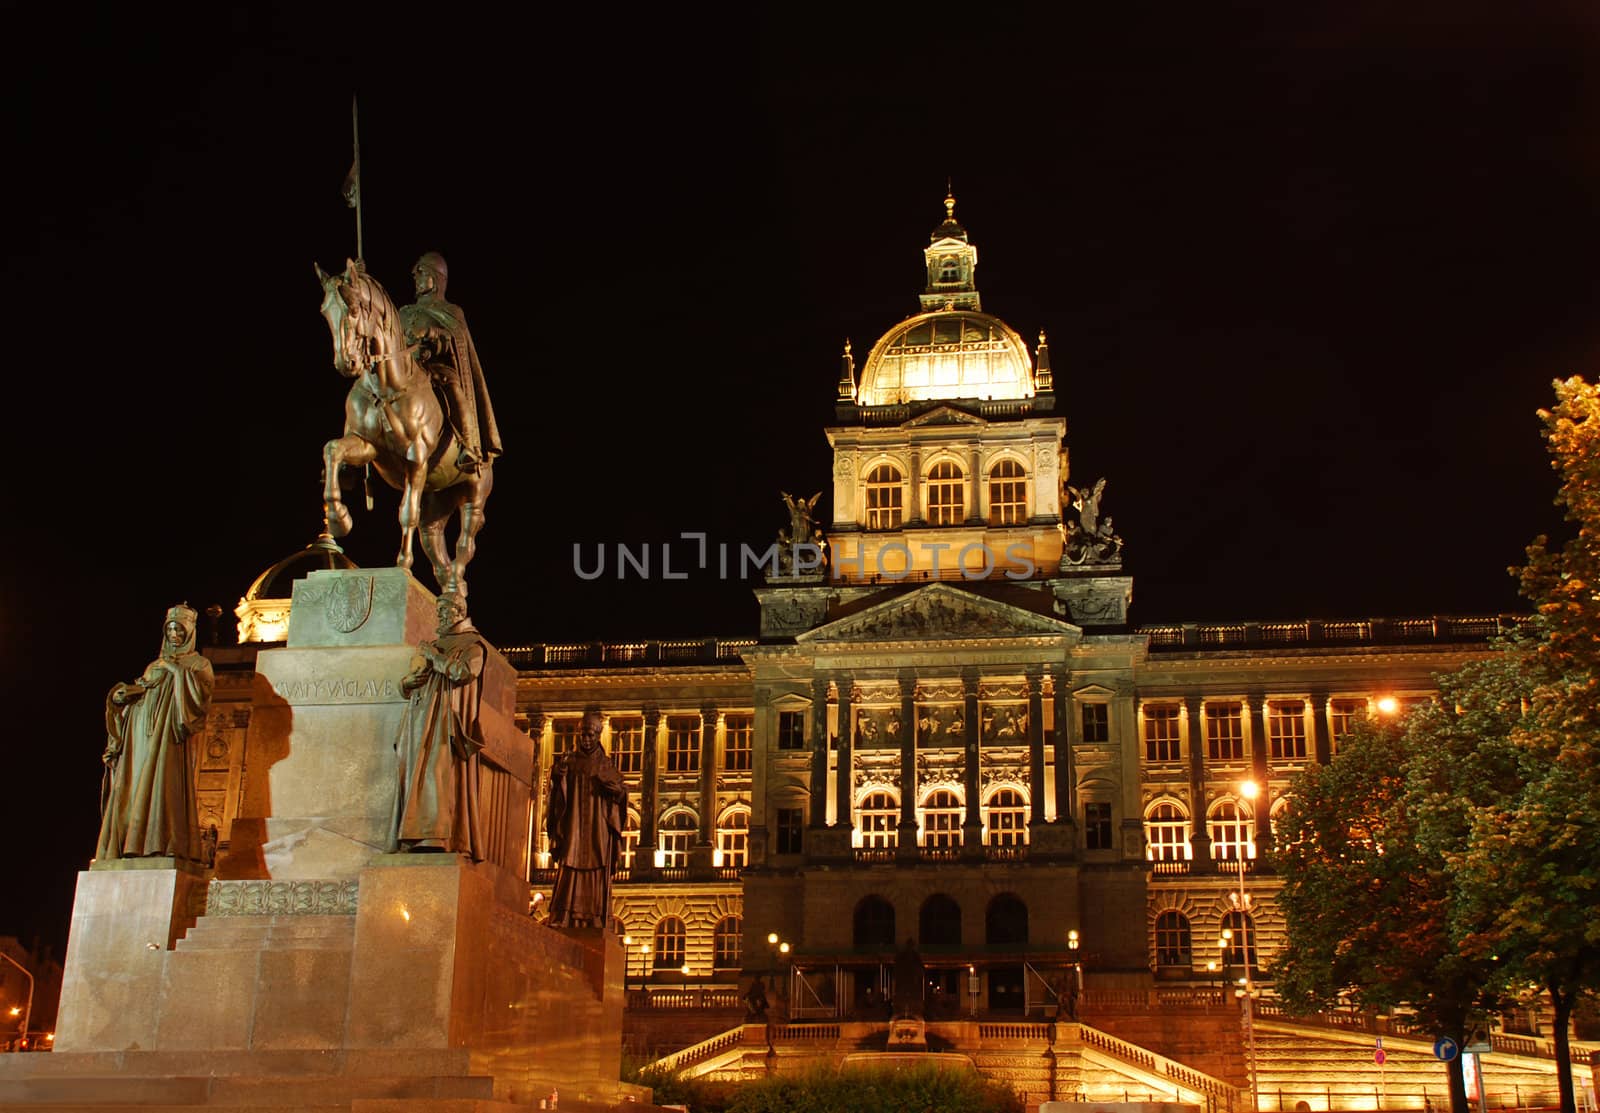 Museum and Wenceslas at night by fyletto